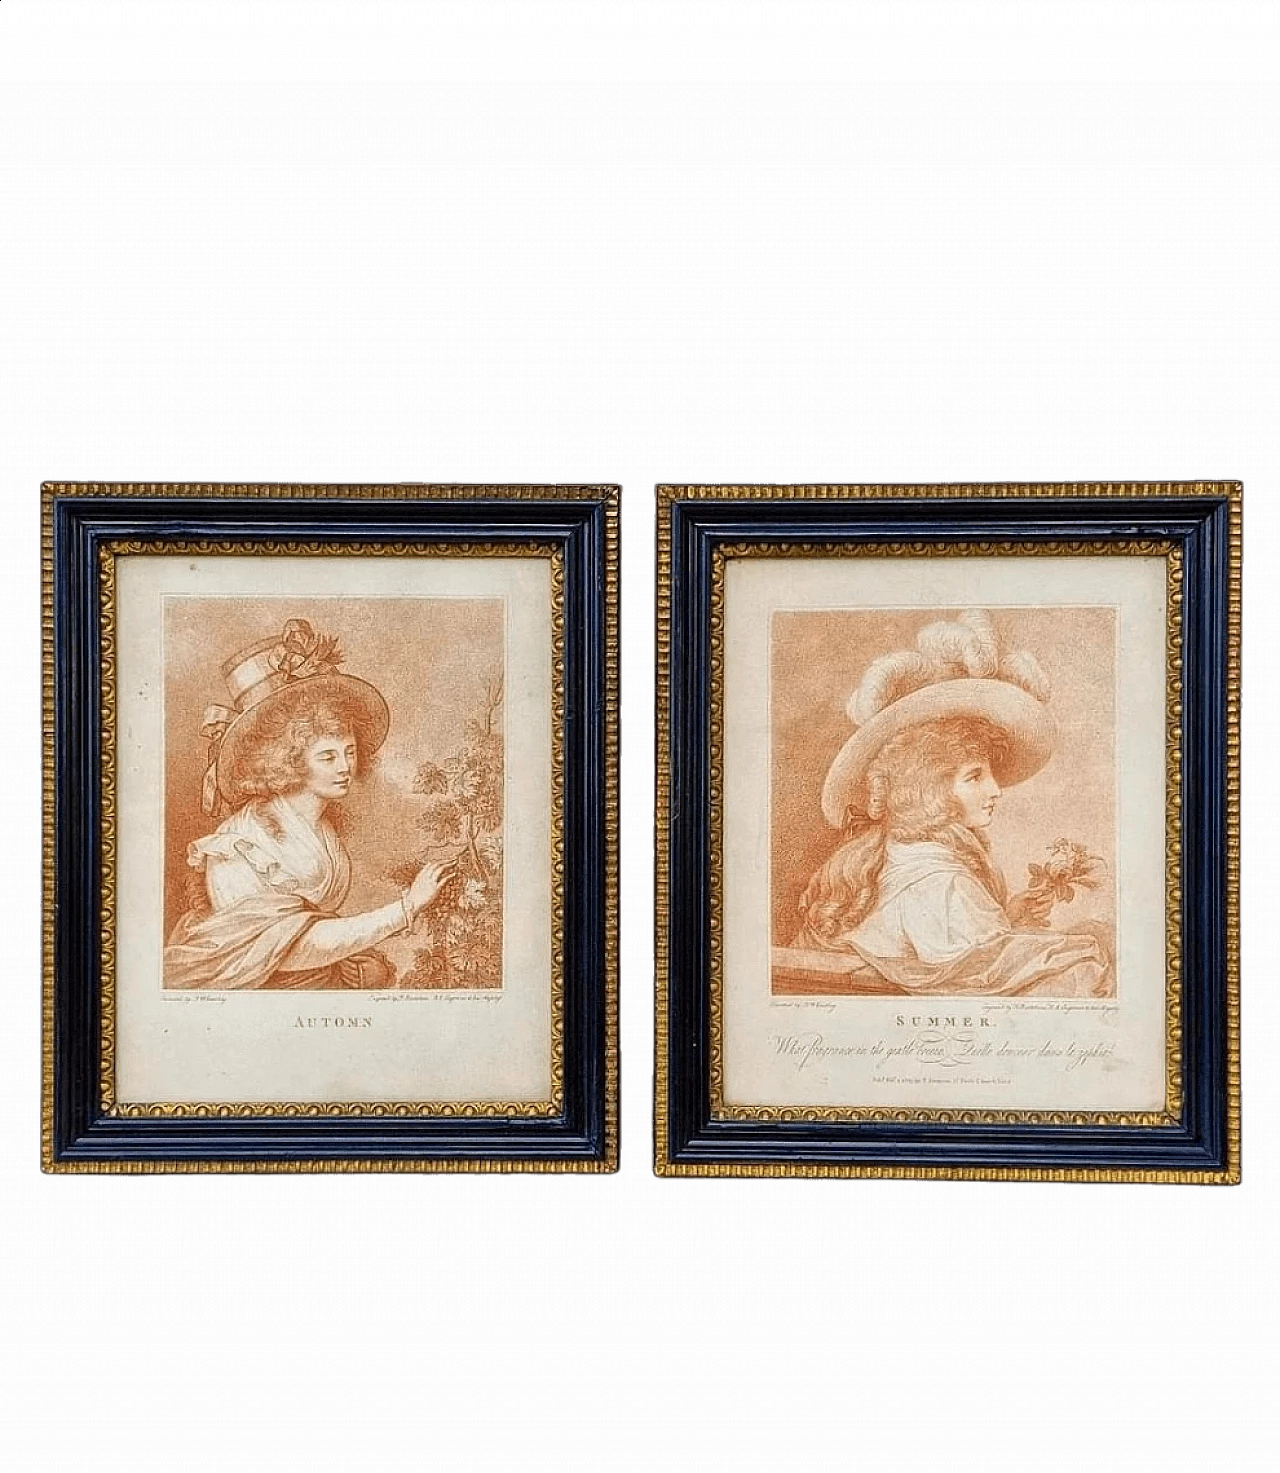 Pair of Automn and Summer sanguine etchings by Francesco Bartolozzi, 1780 11